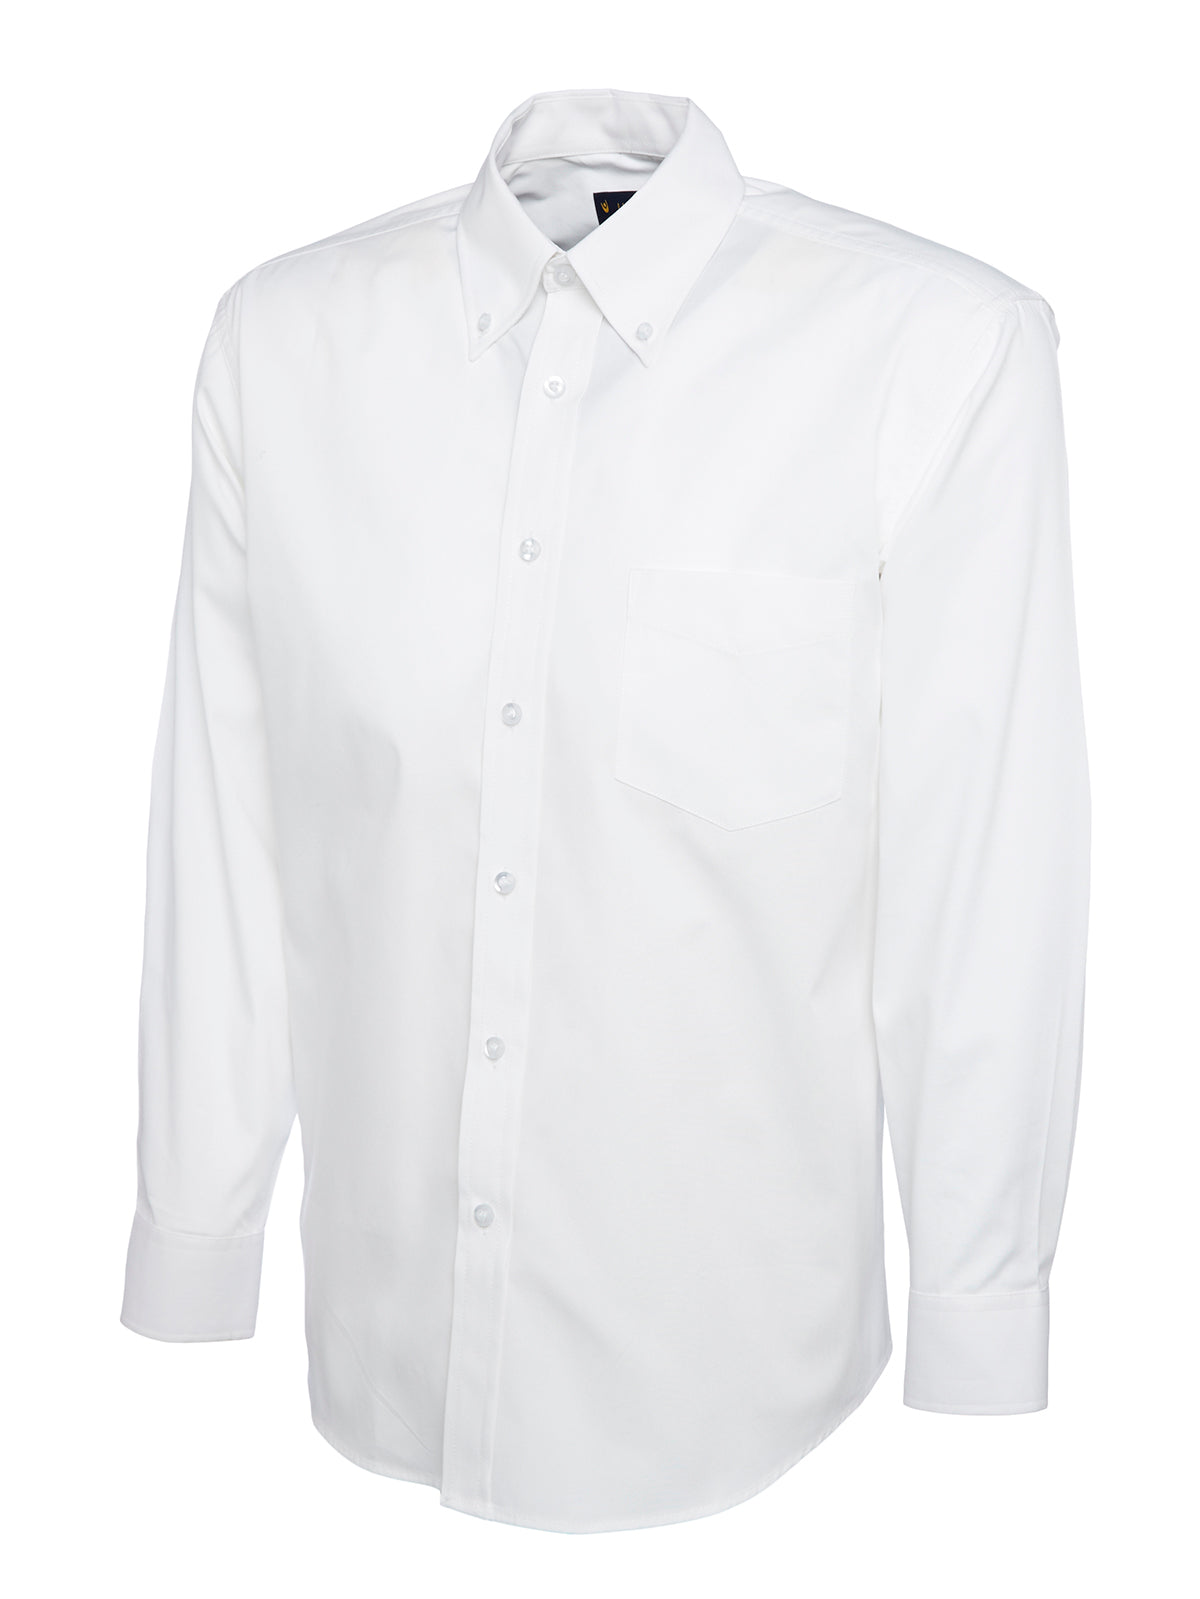 mens_pinpoint_oxford_full_sleeve_shirt_white